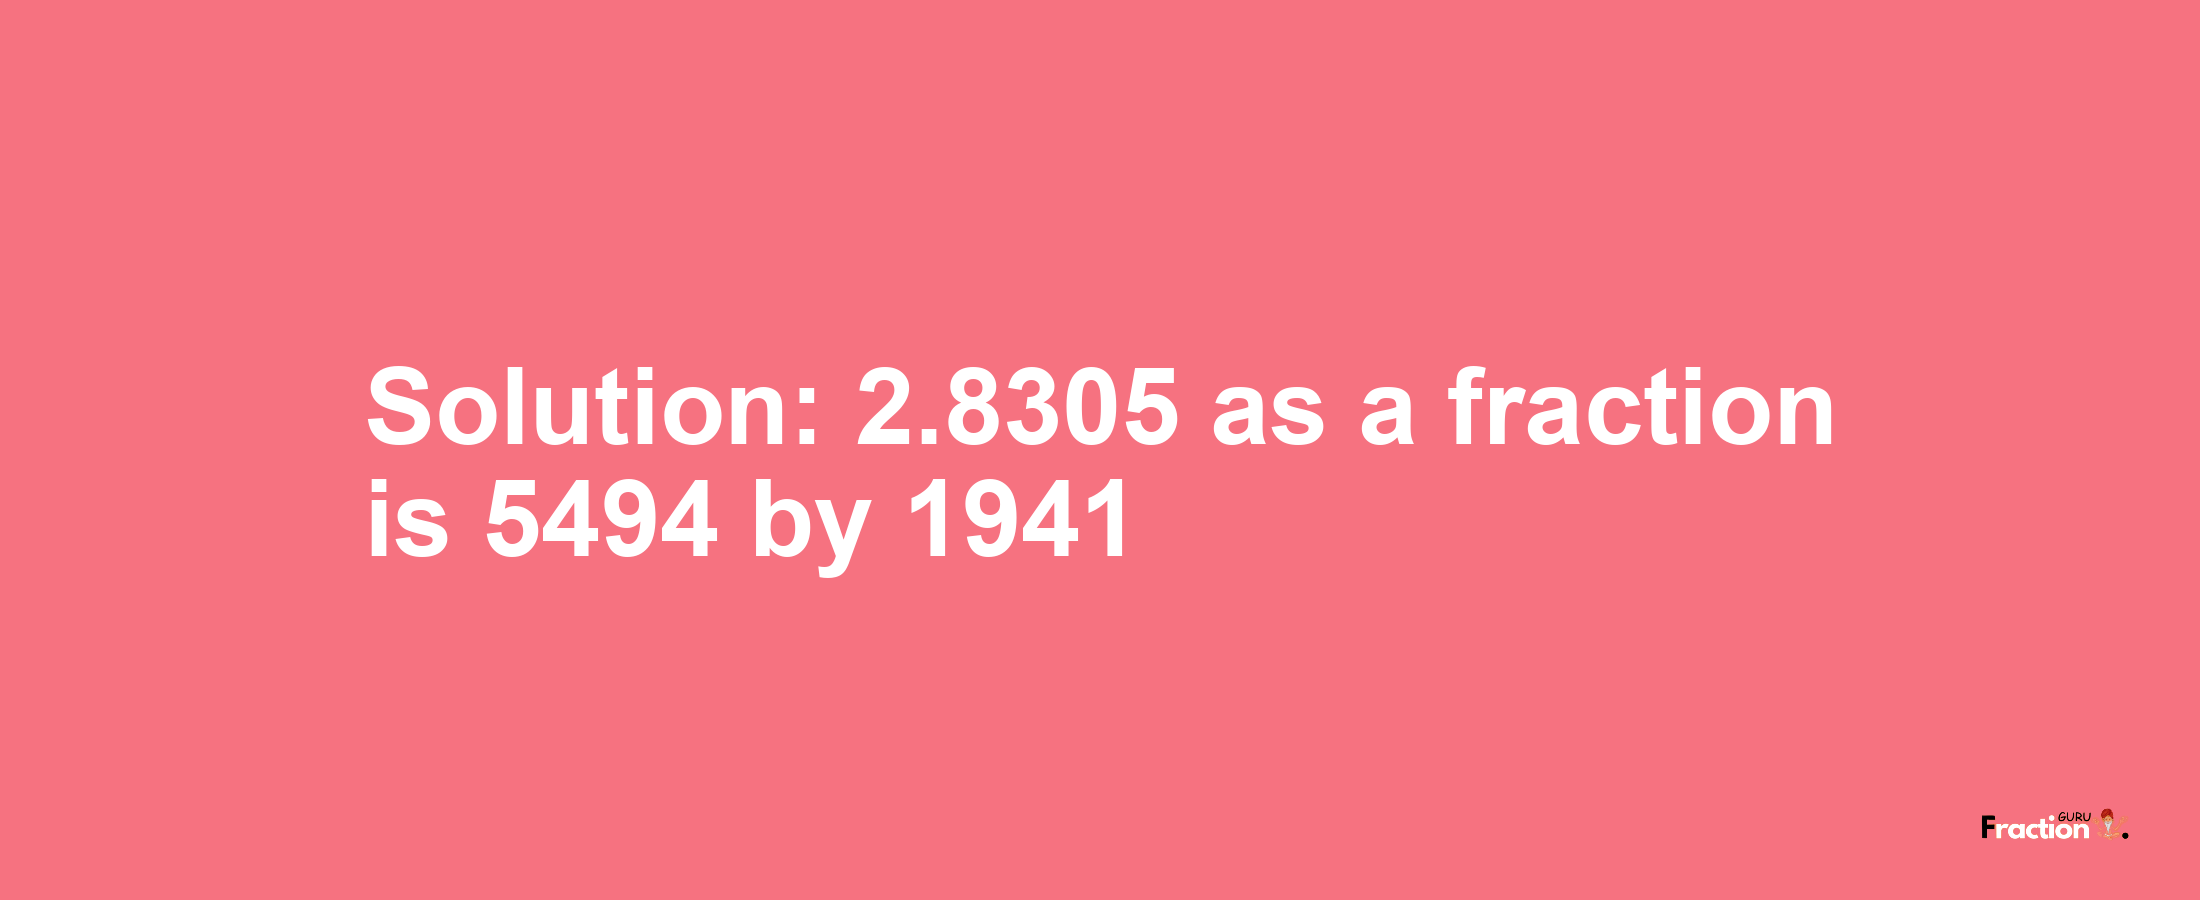 Solution:2.8305 as a fraction is 5494/1941